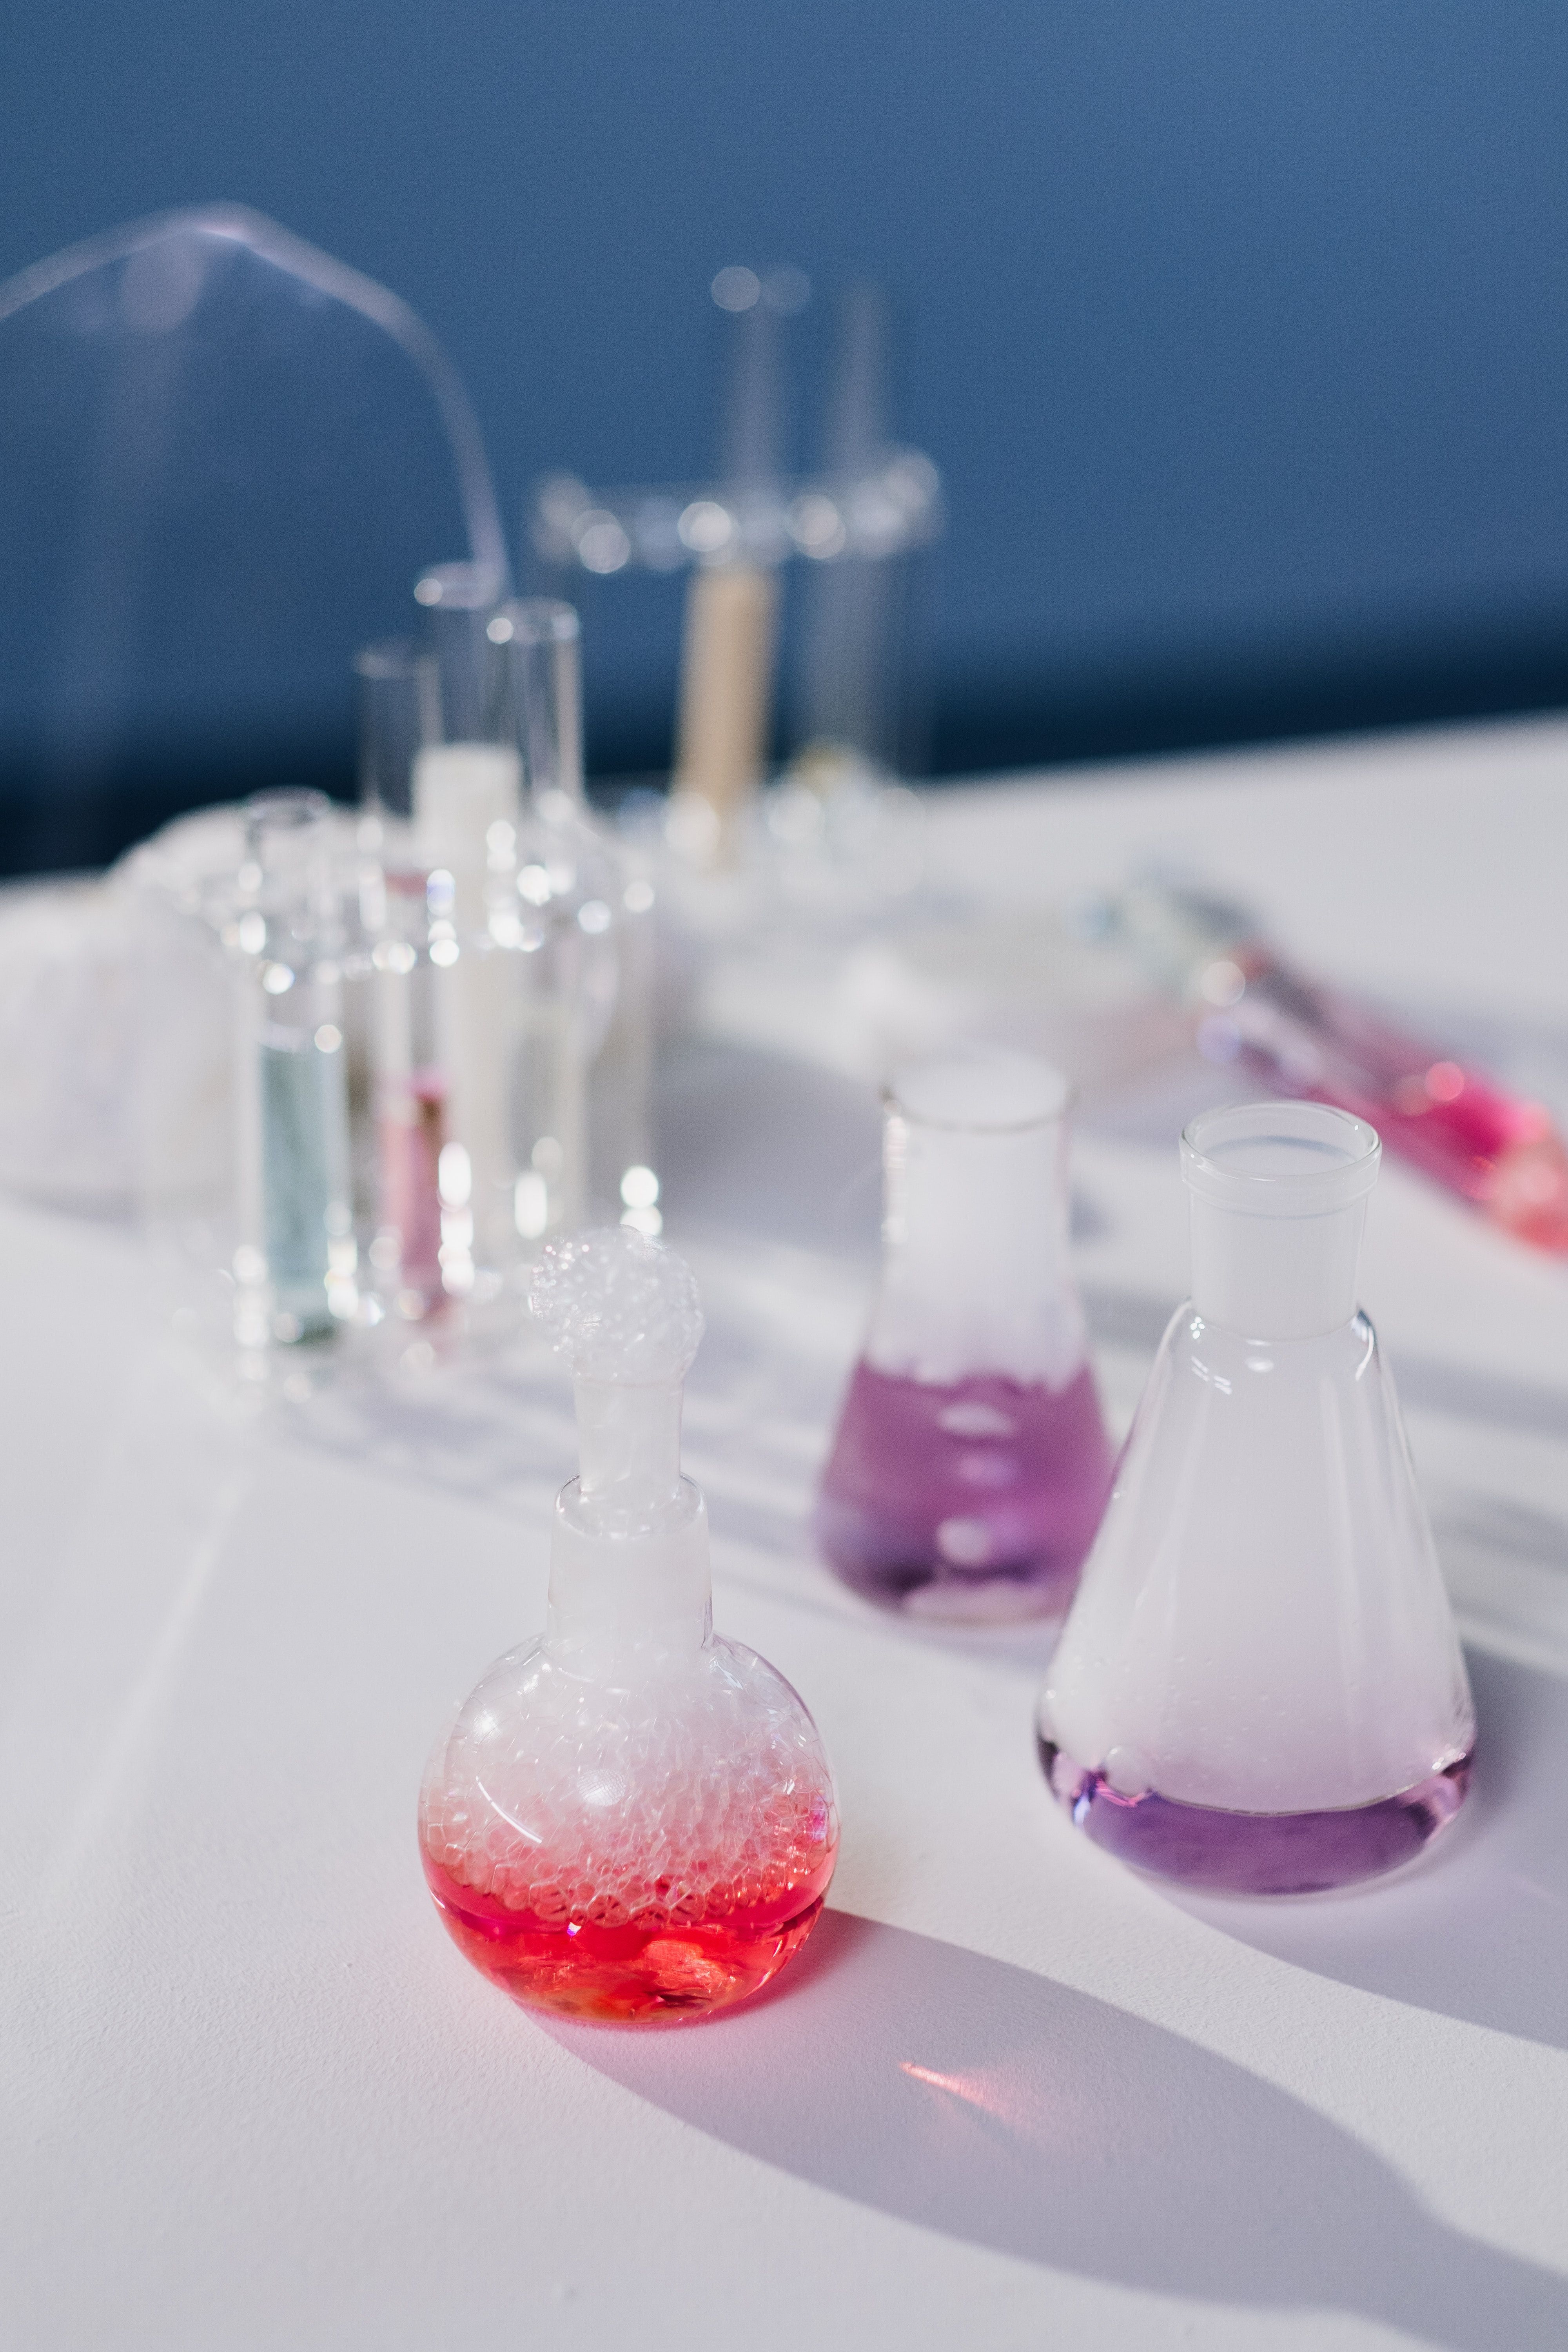 A Close Up Shot of Chemistry Flasks With Chemistry Reaction · Free